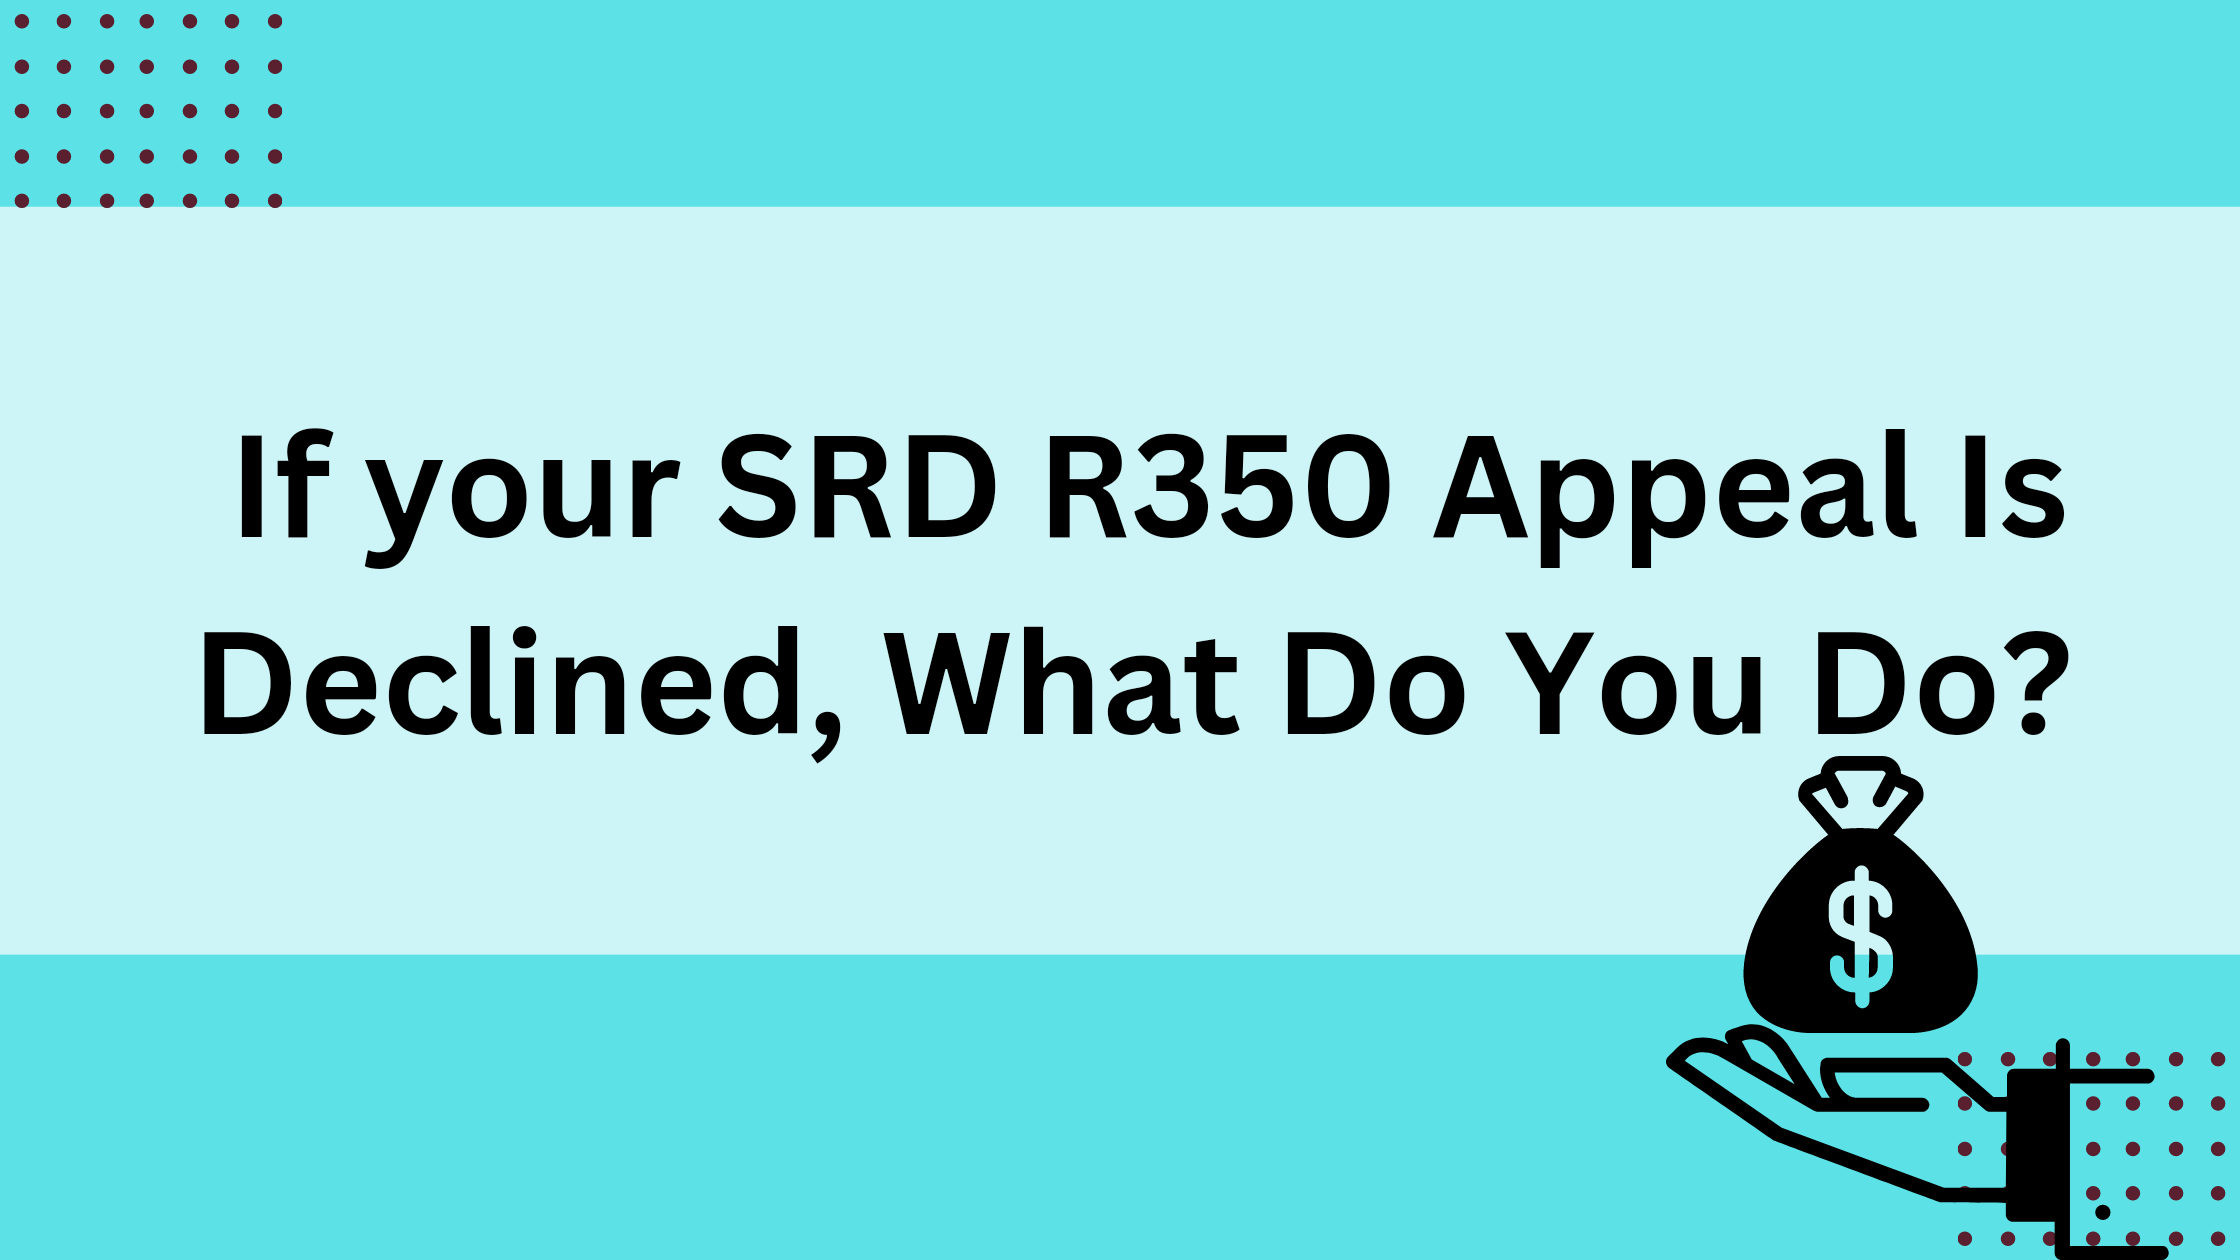 If your SRD R350 Appeal Is Declined, What Do You Do?